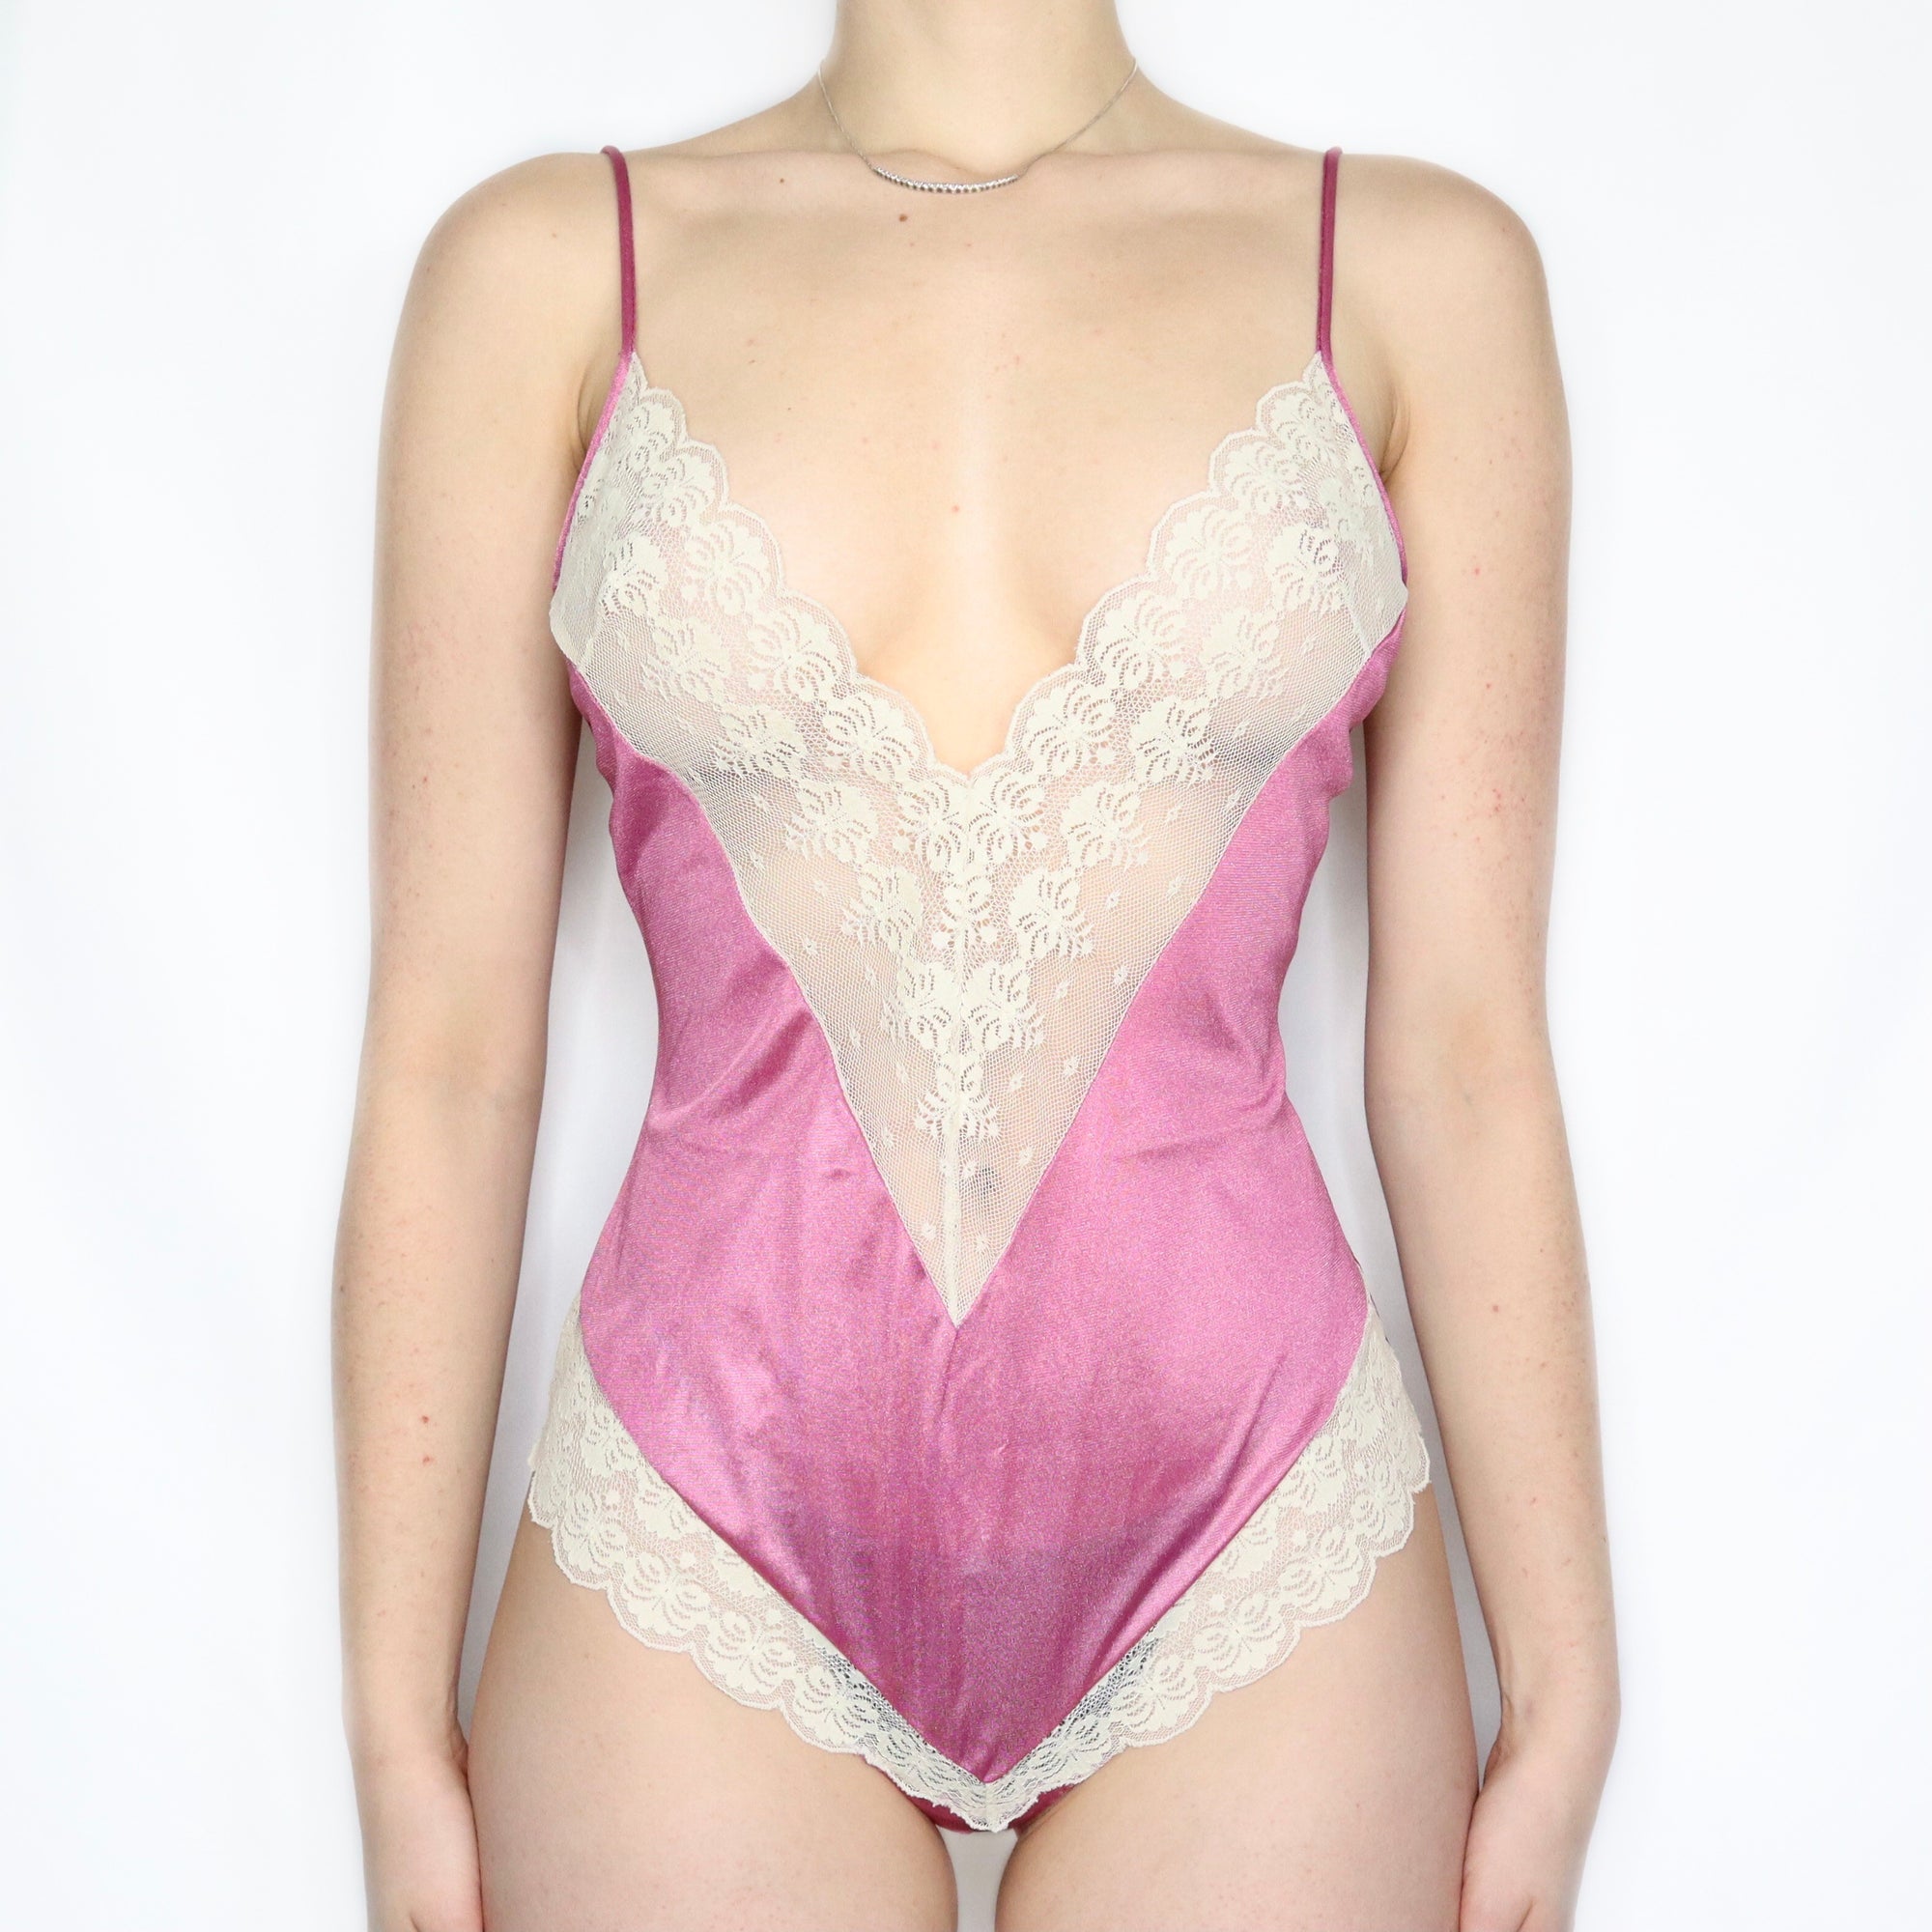 Vintage 70s Rose Pink and Cream Lace Teddy